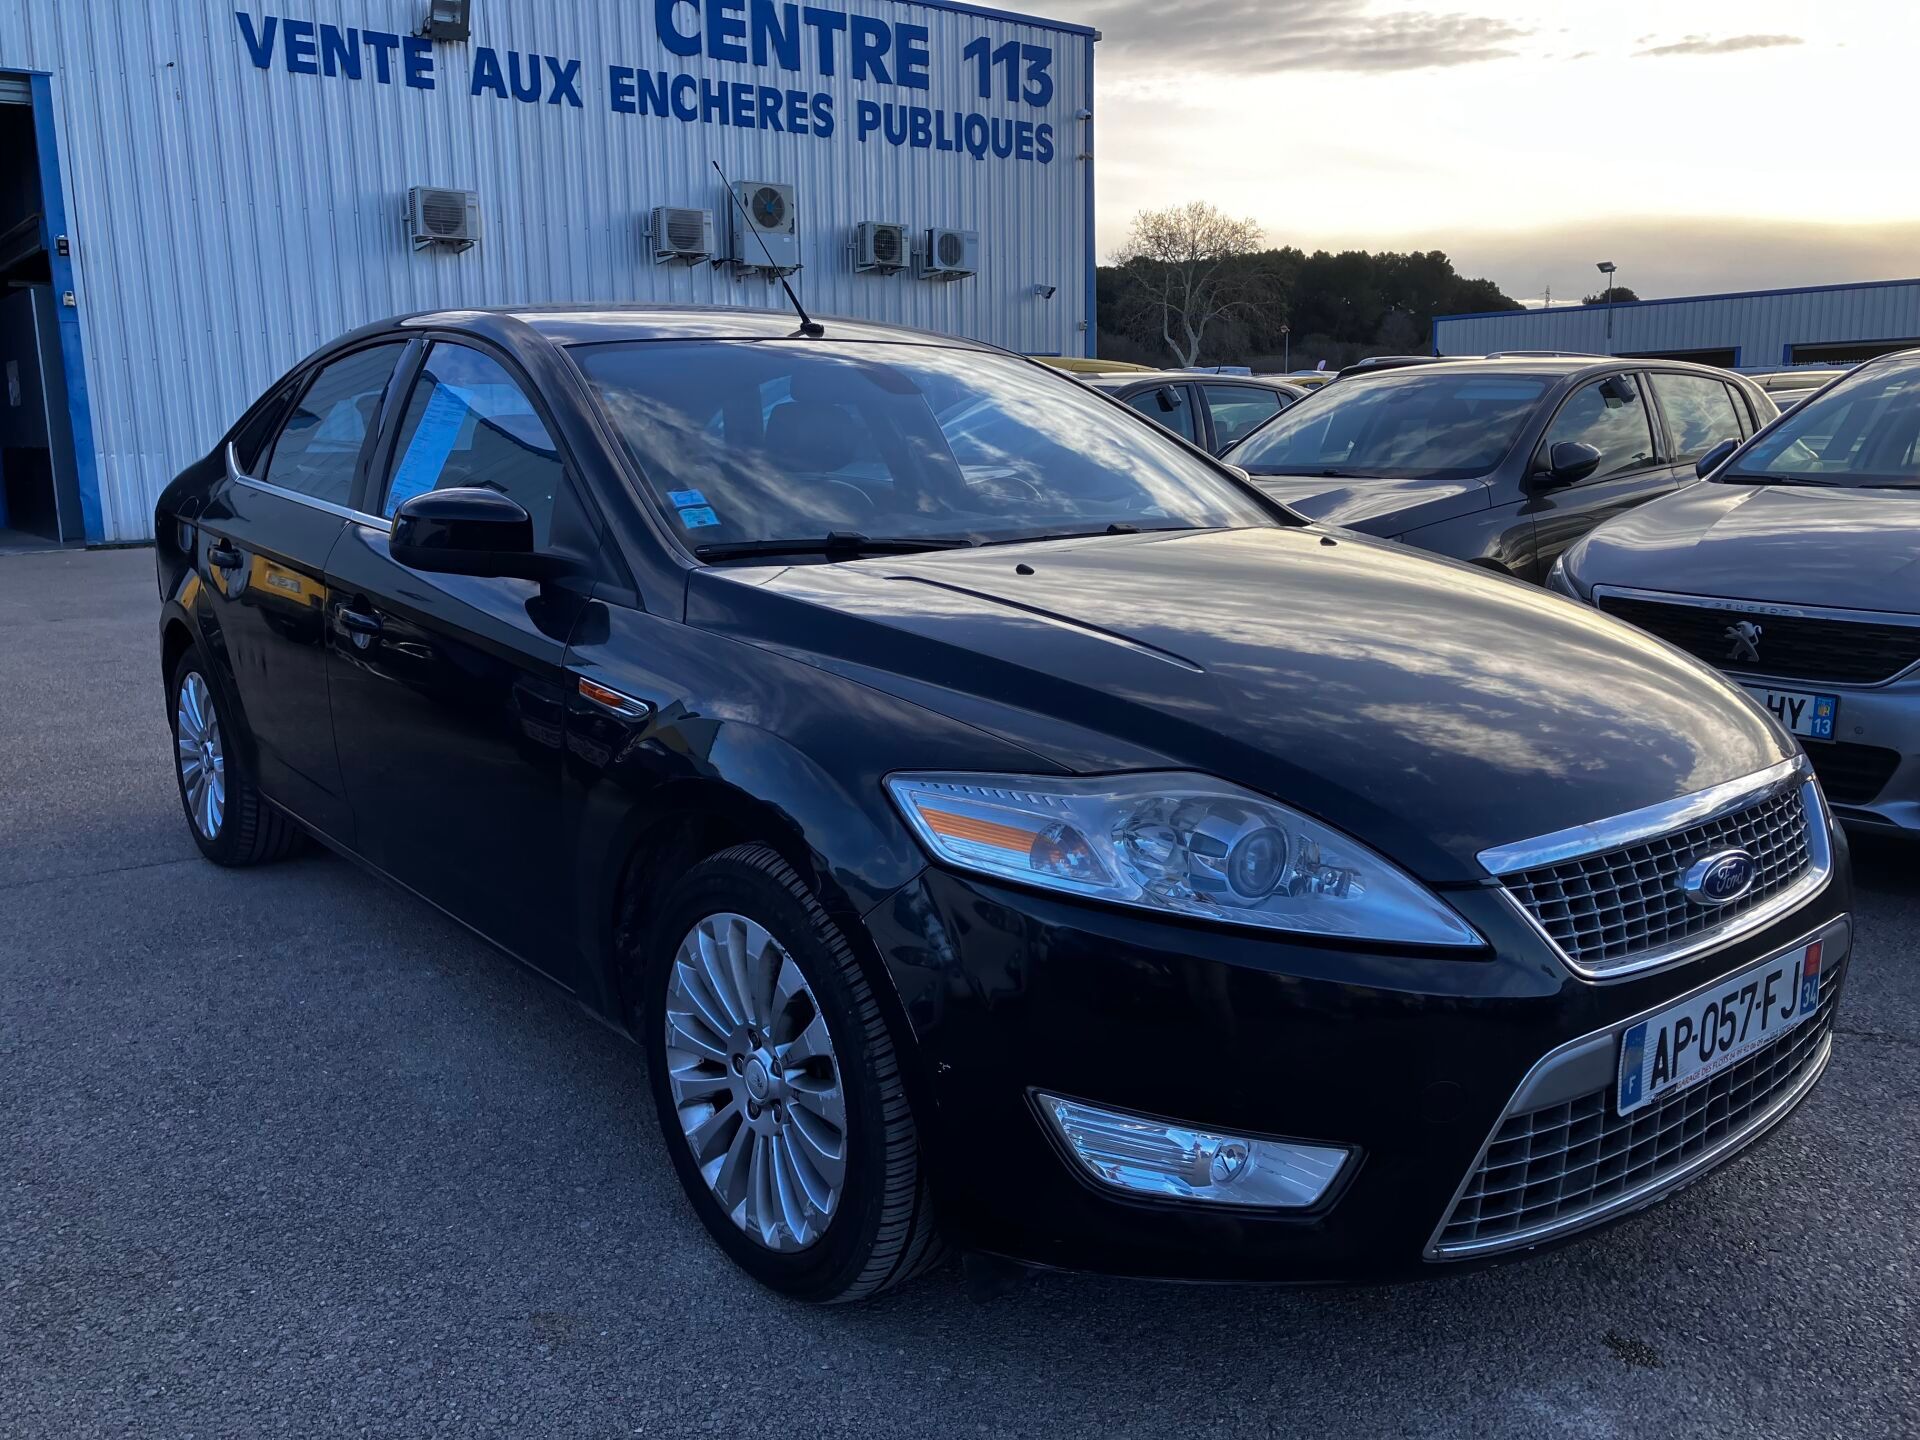 Null MONDEO 1.8 TDCI 125 CH
VP FORD MONDEO 1.8 TDCI 125 CH 1.8 TDCI
Carrosserie &hellip;